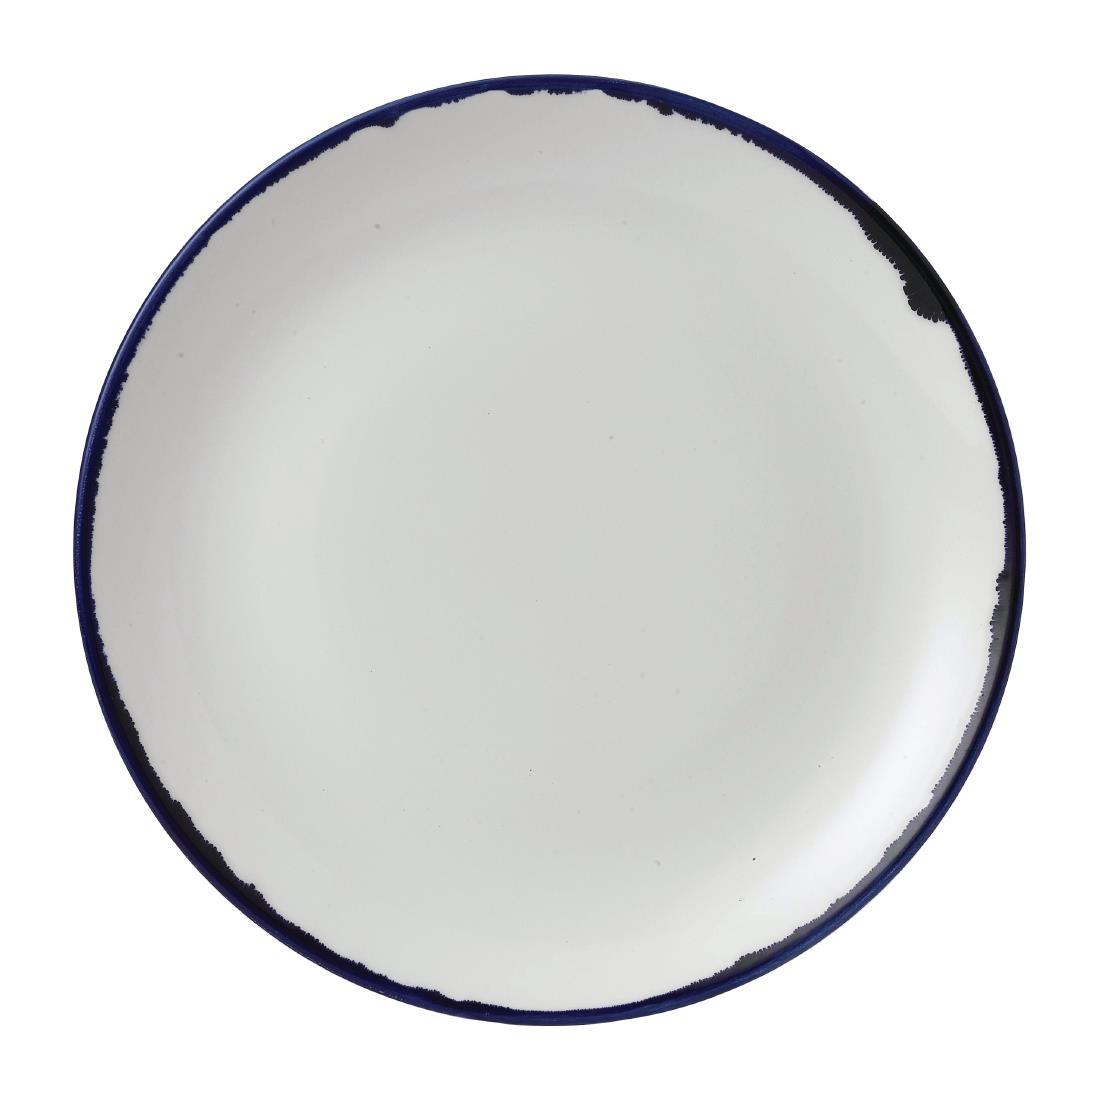 Dudson Harvest Ink Coupe Plate 254mm (Pack of 12) - FE346  - 1